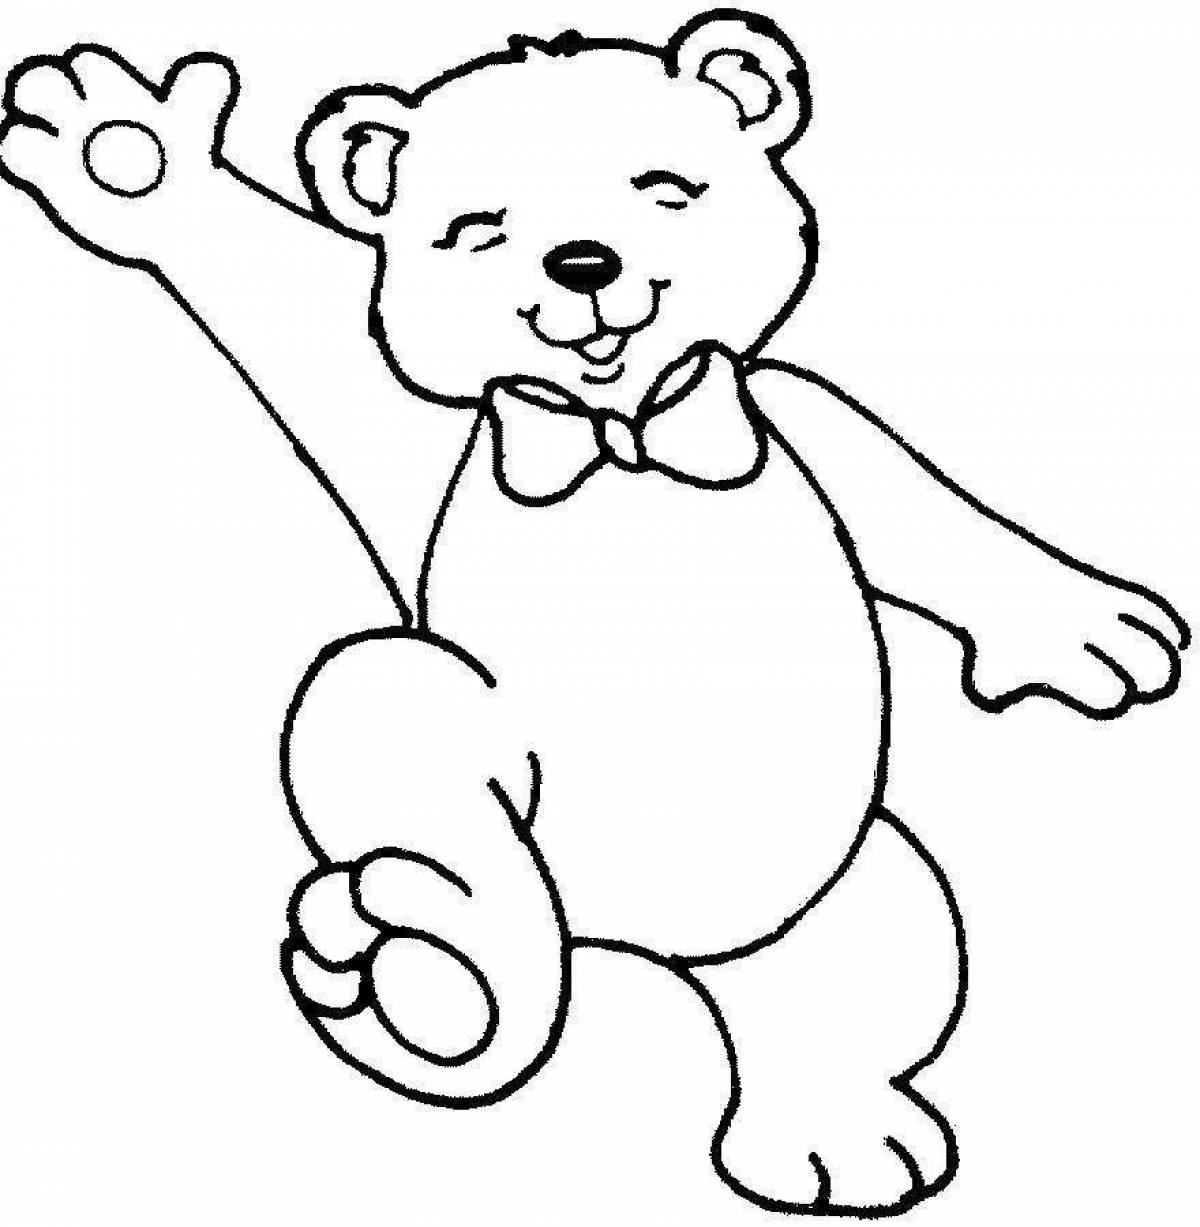 Playful bear drawing for kids